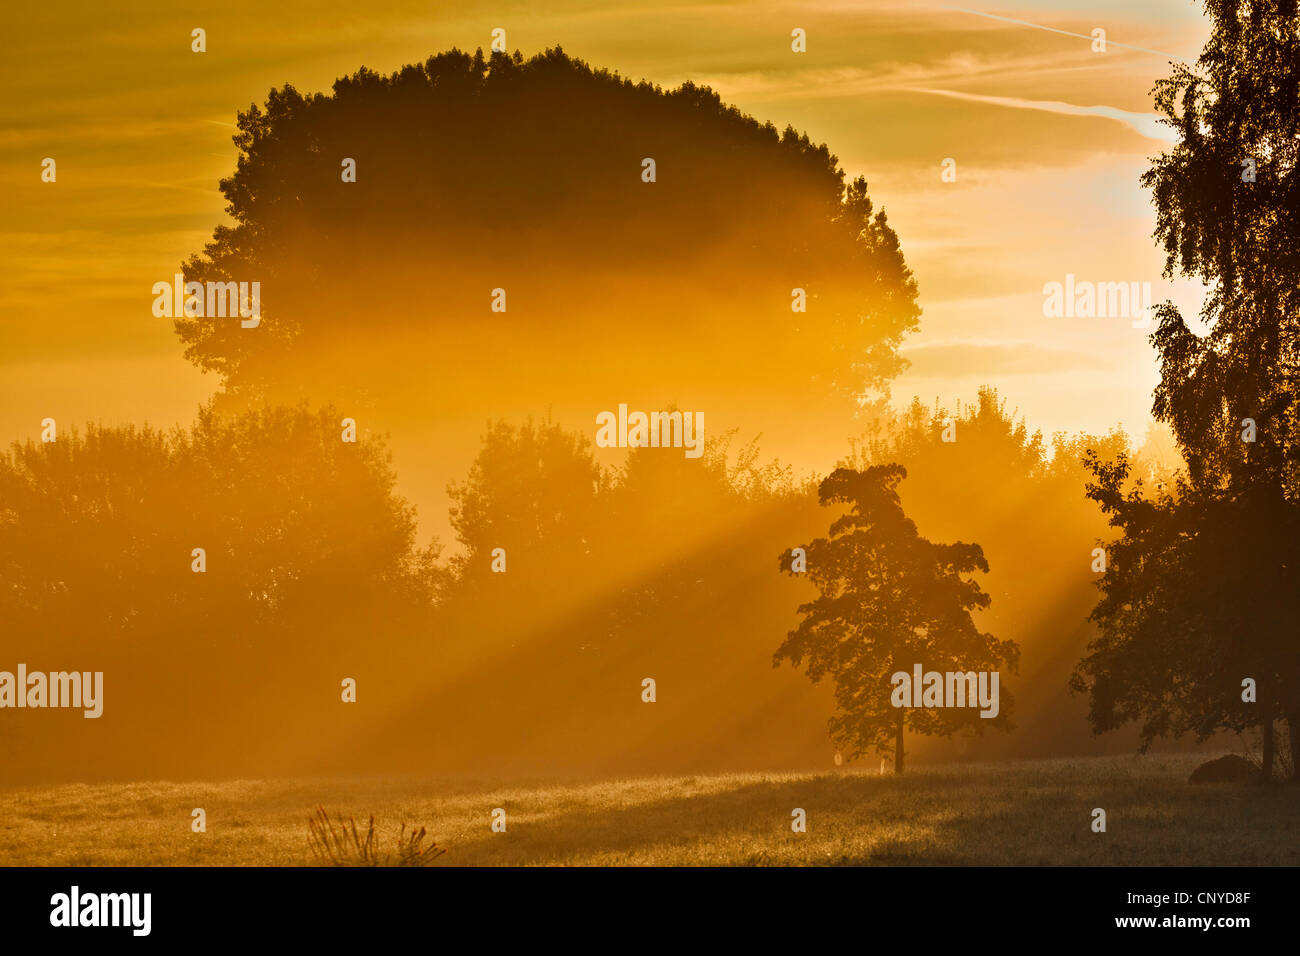 pictoresque sunrise over foggy forest and meadow landscape, Germany, Bavaria, Isental Stock Photo